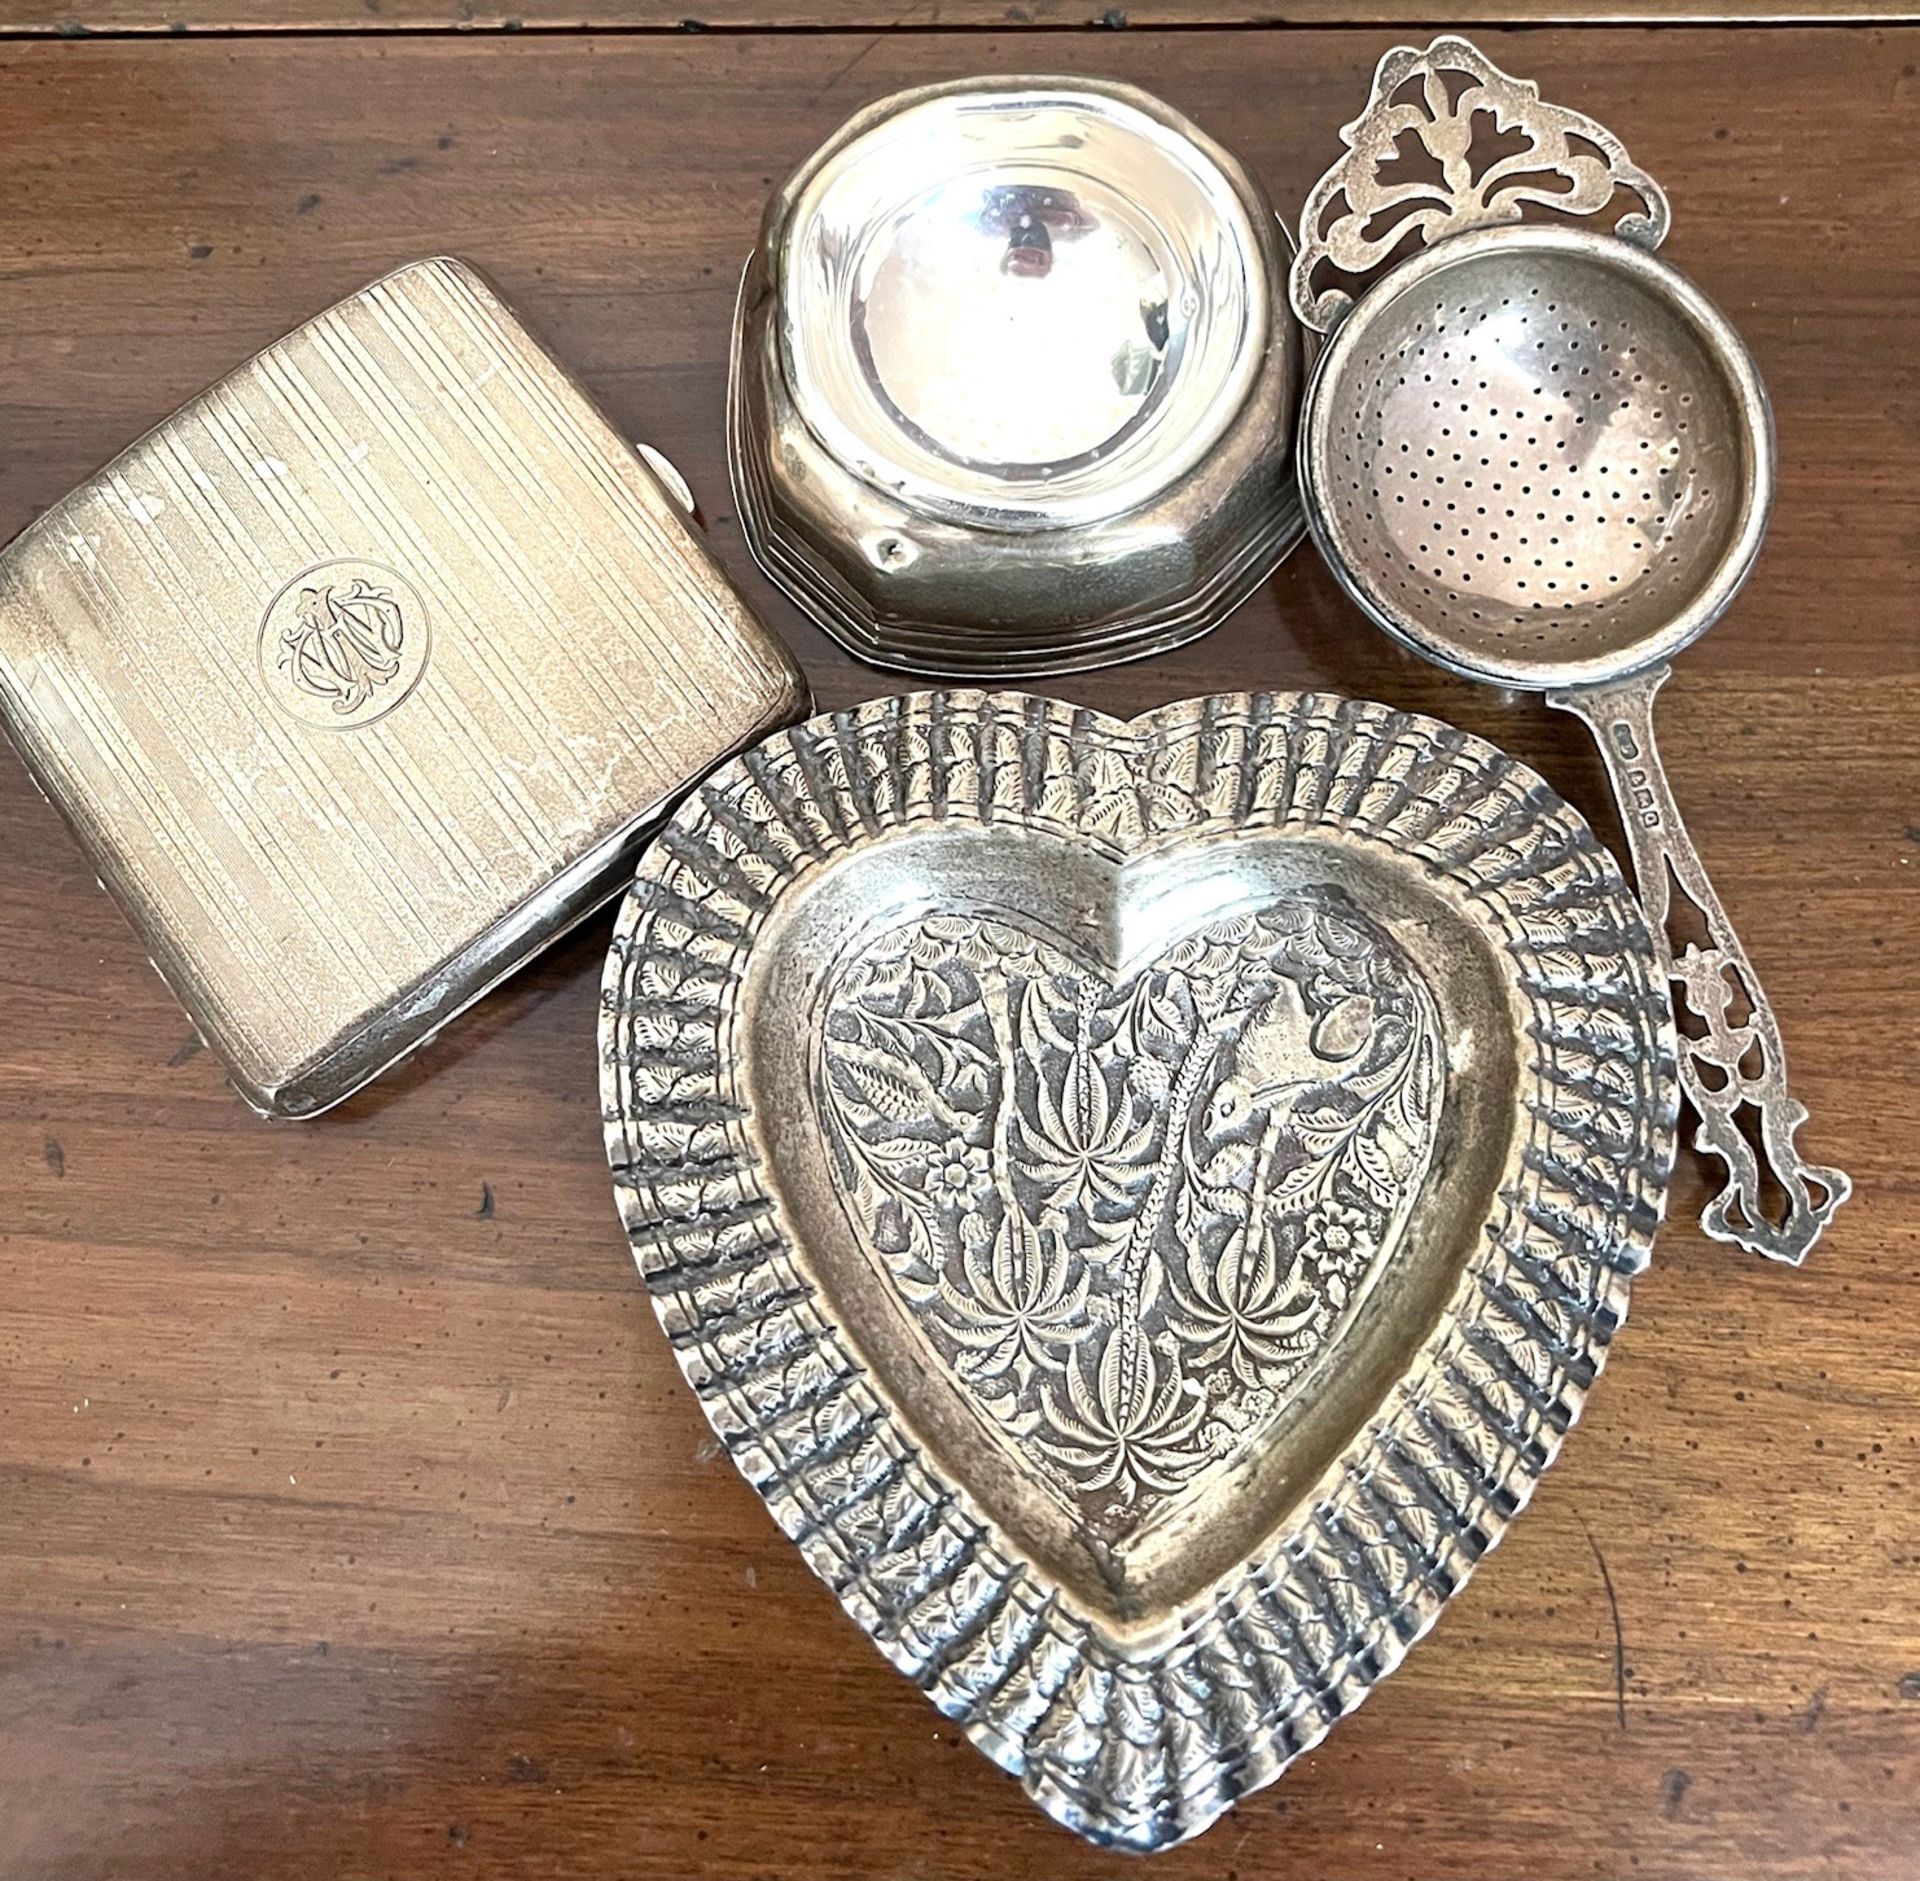 INDIAN WHITE METAL HEART SHAPE TRAY, SILVER TEA STRAINER, CONVEX CIGARETTE CASE, TOTAL WEIGHT APPROX